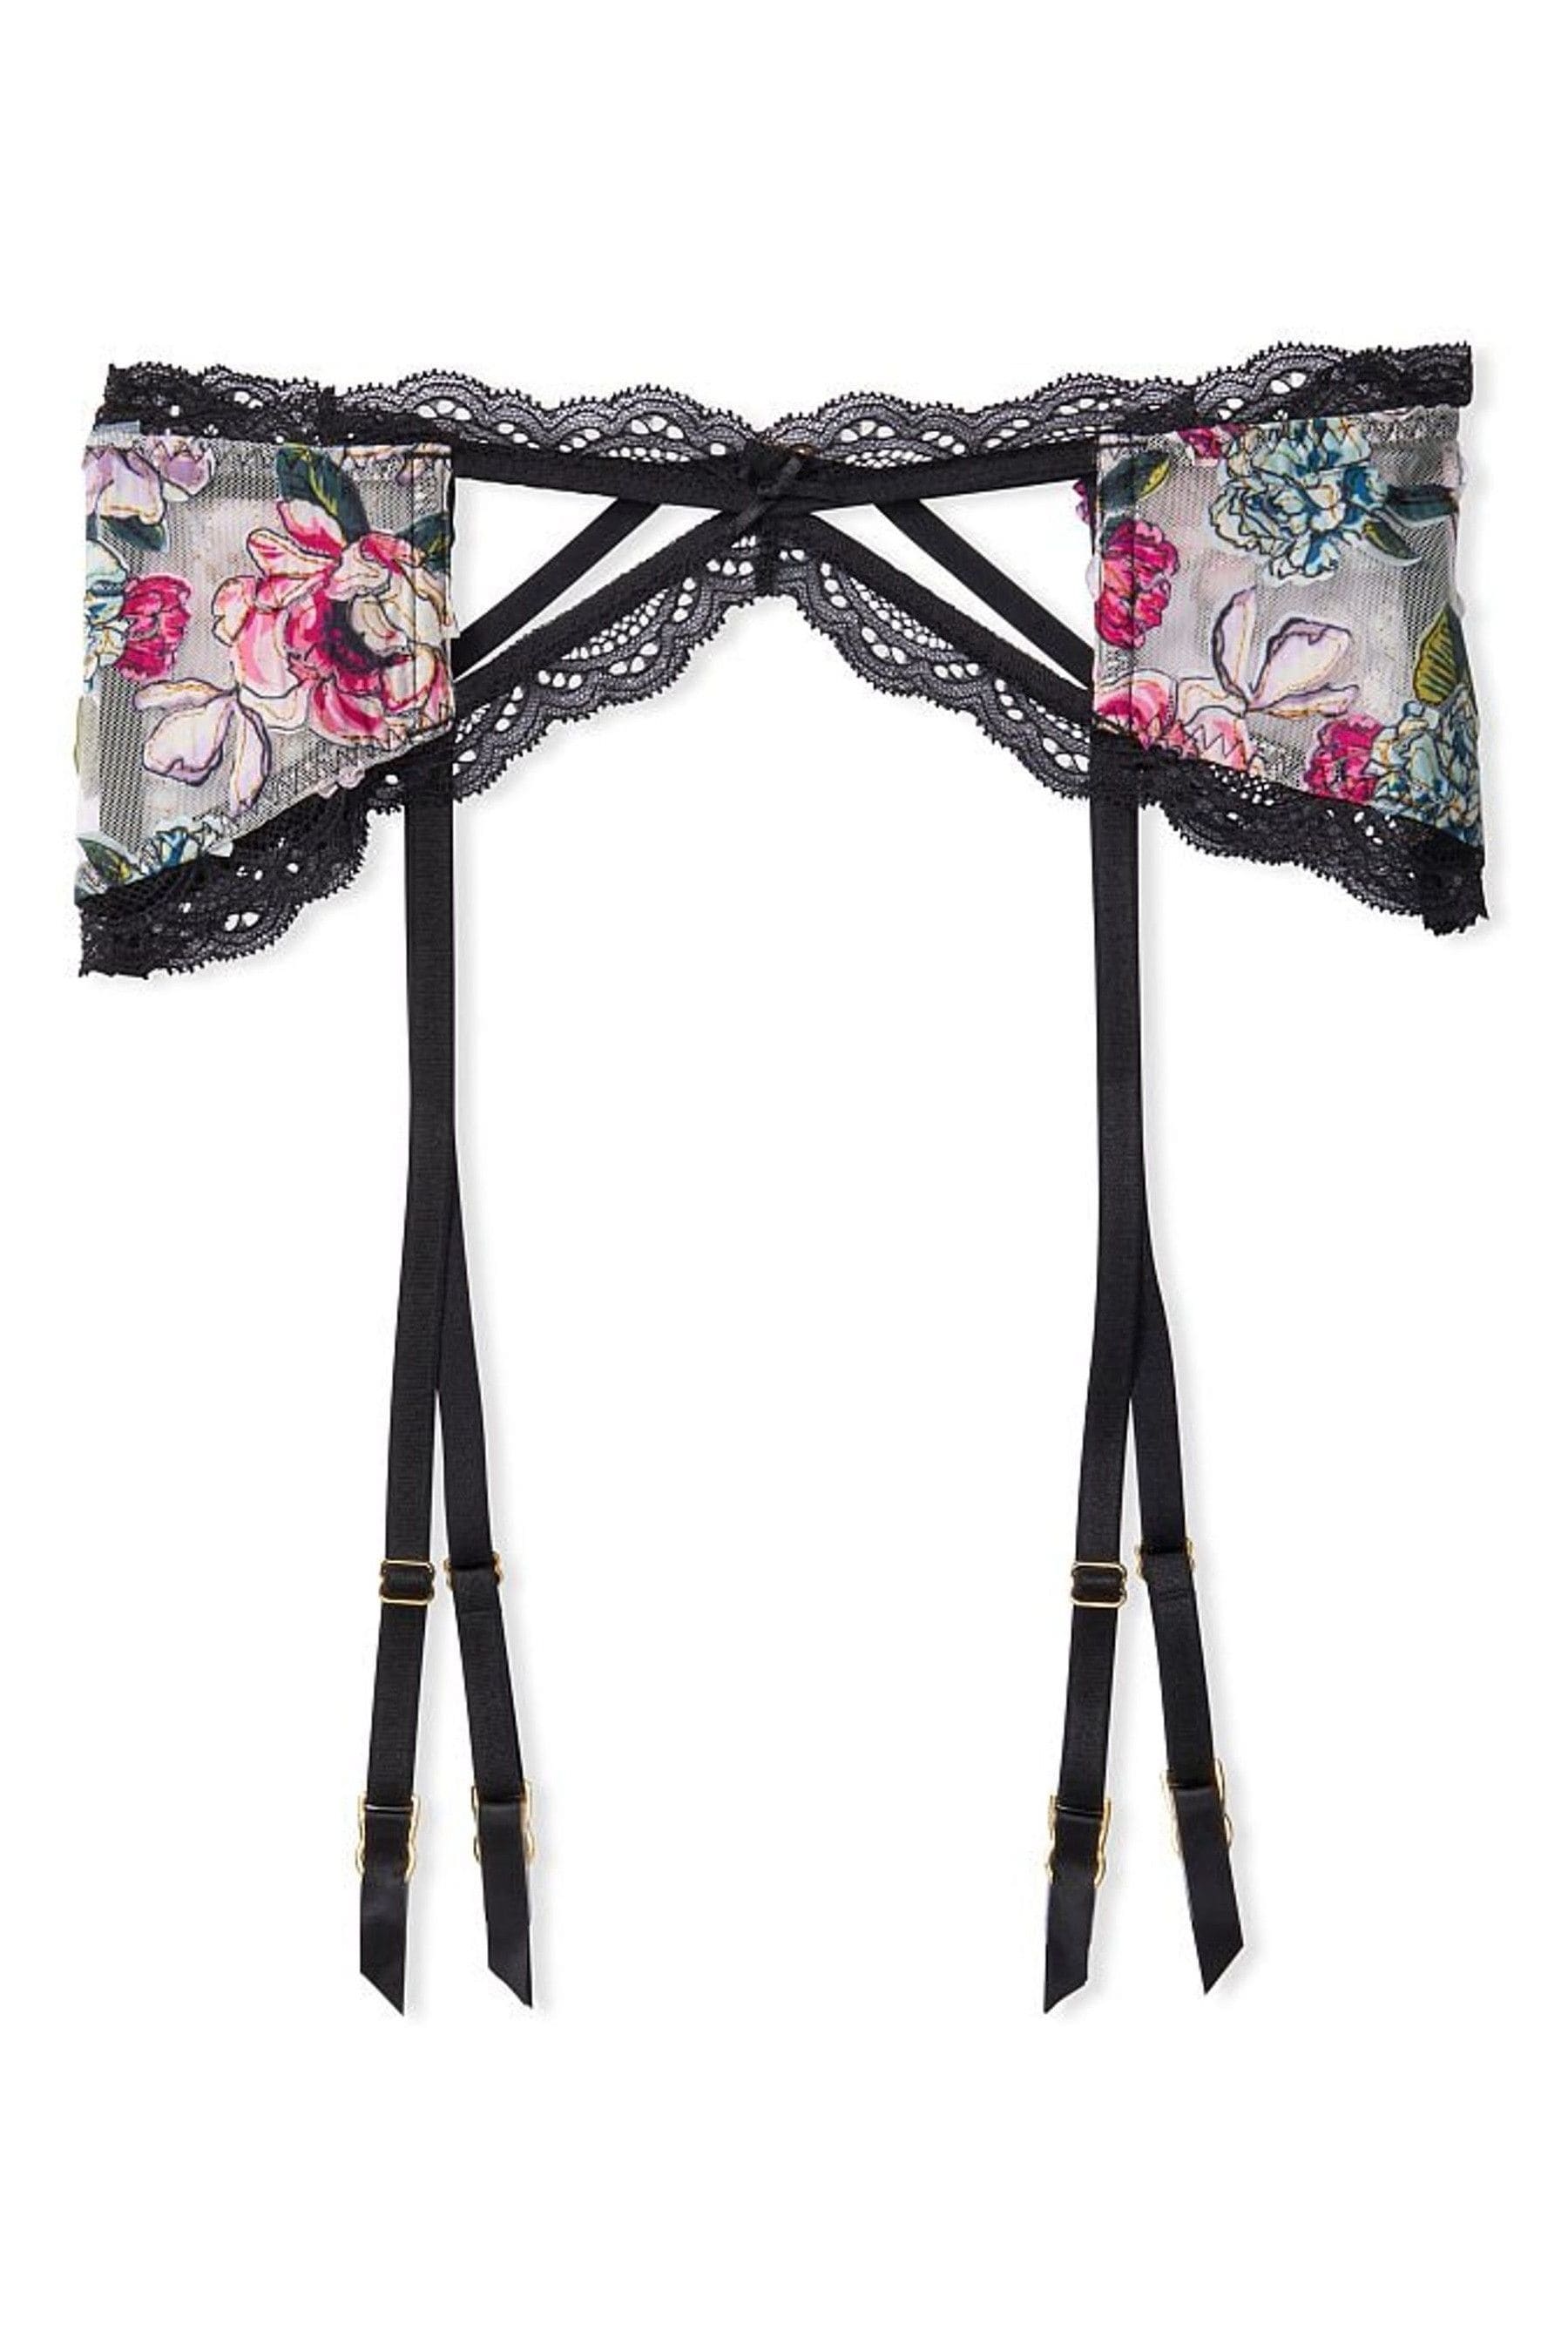 Buy Victoria's Secret Purest Pink Embroidered Lace Suspenders from the ...